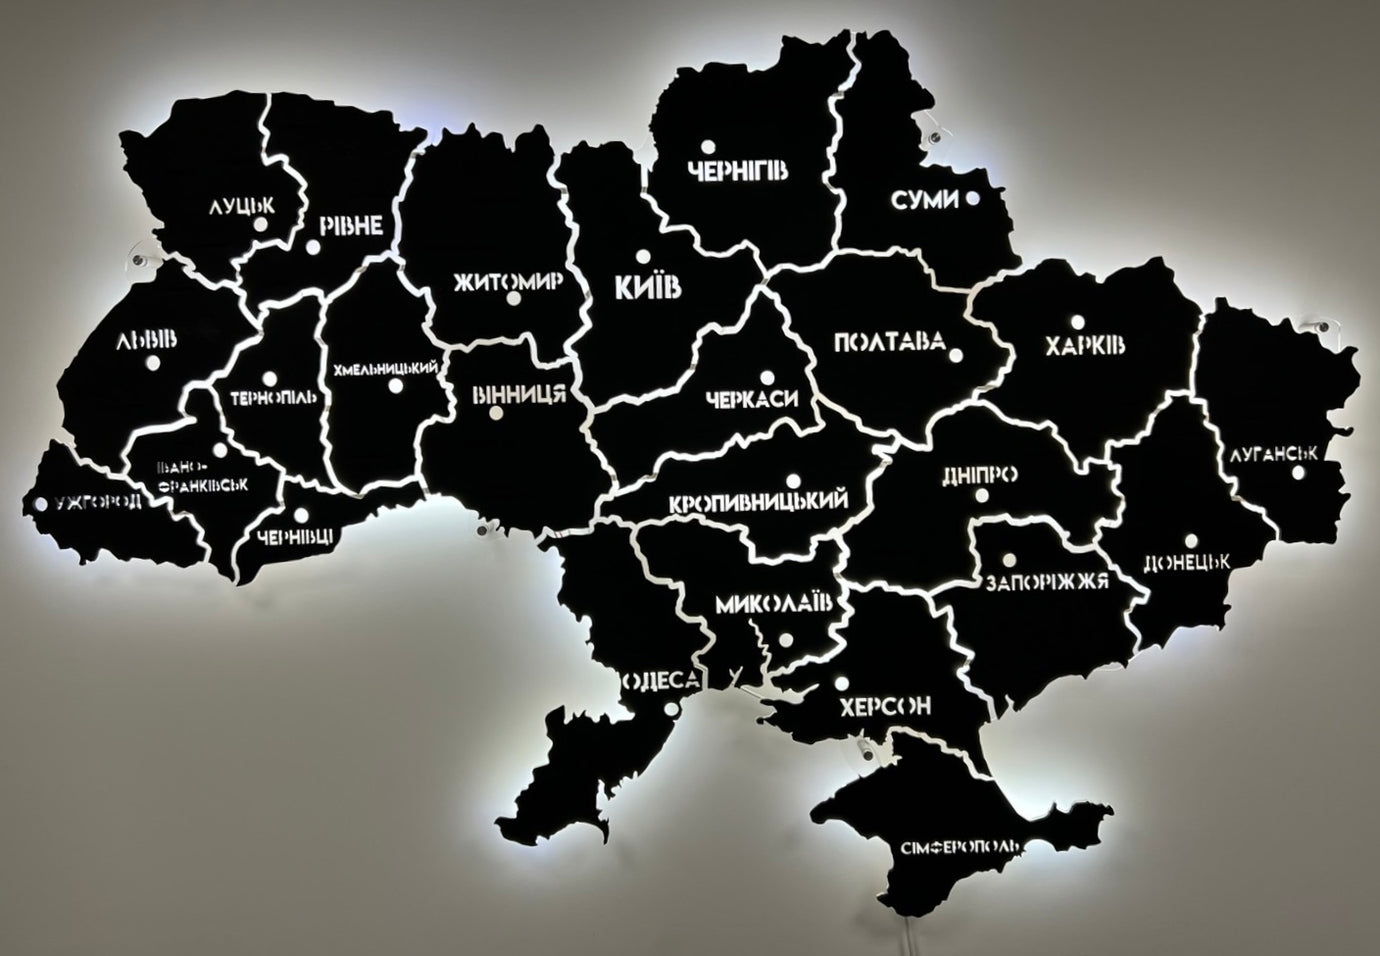 Ukraine LED map on acrylic glass with backlighting  between regions color Black